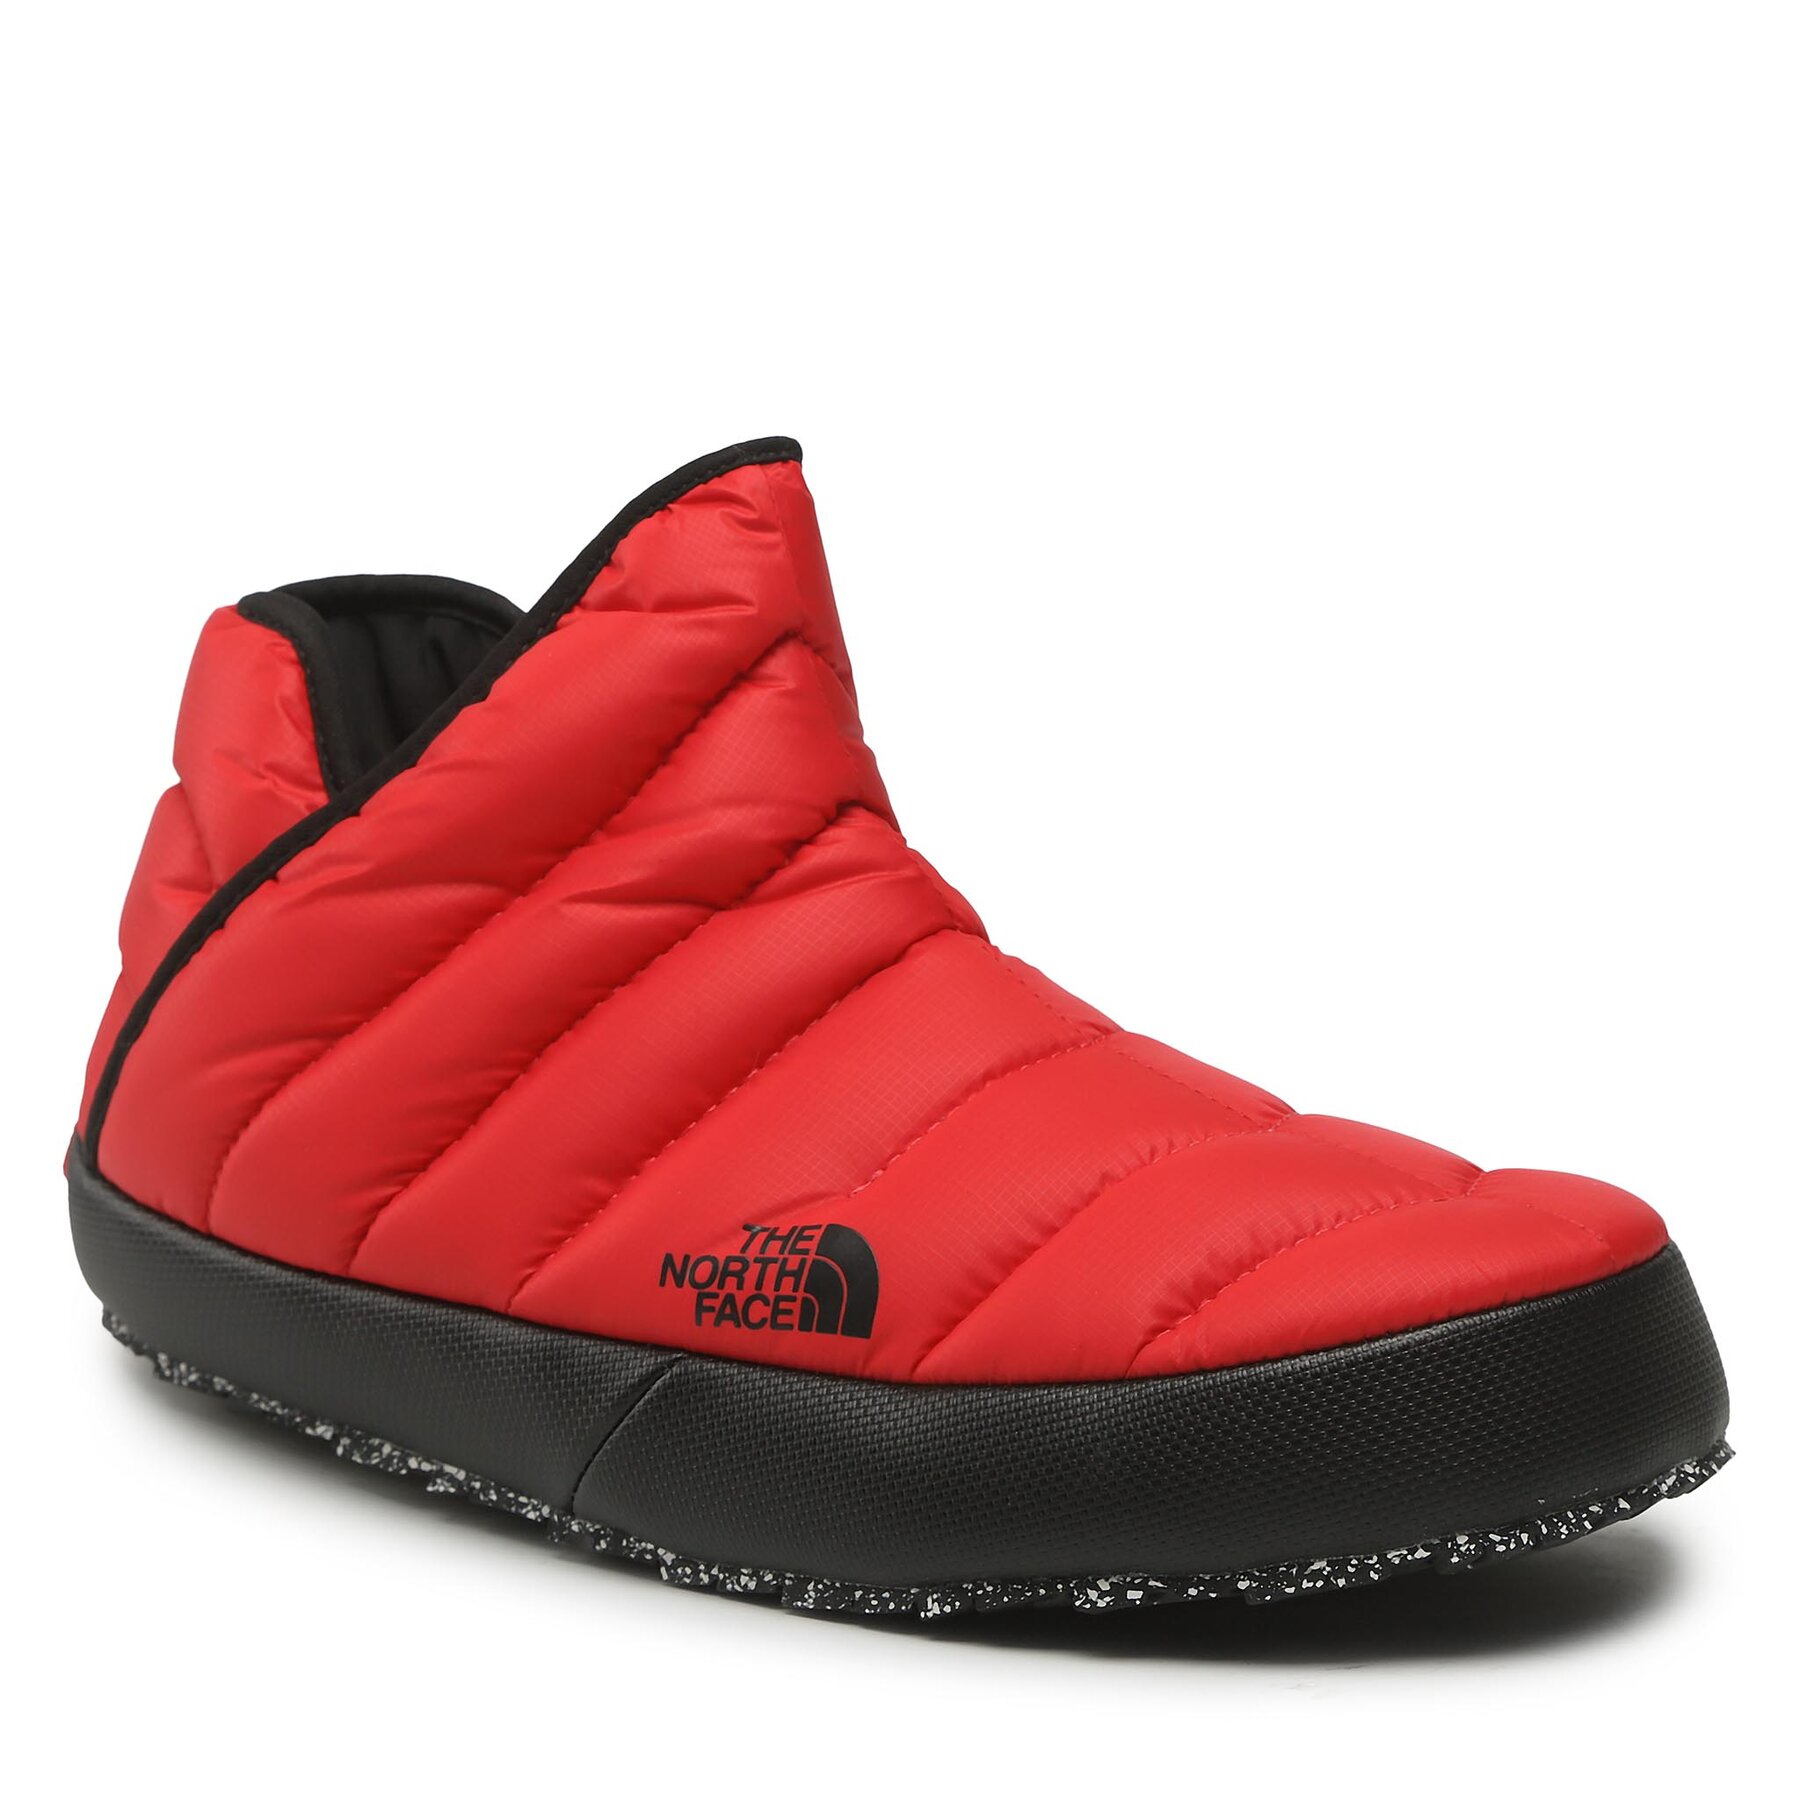 Copati The North Face Thermoball Traction Bootie NF0A3MKHKZ31 Tnf Red/Tnf Black